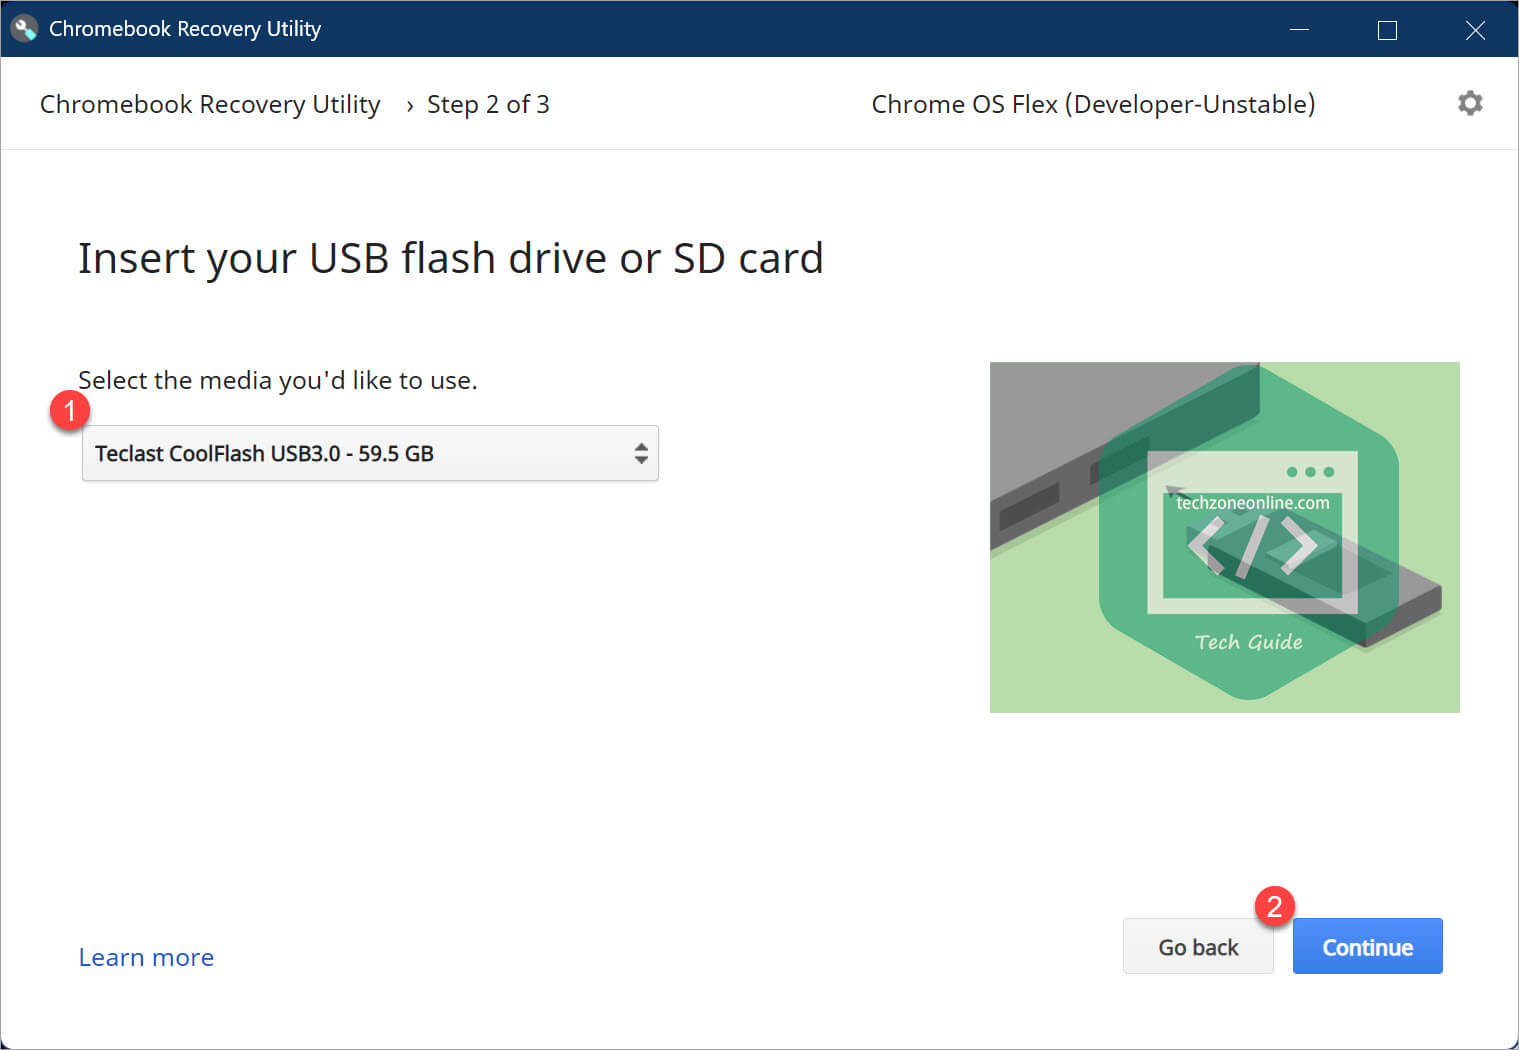 Insert your USB flash drive or SD card